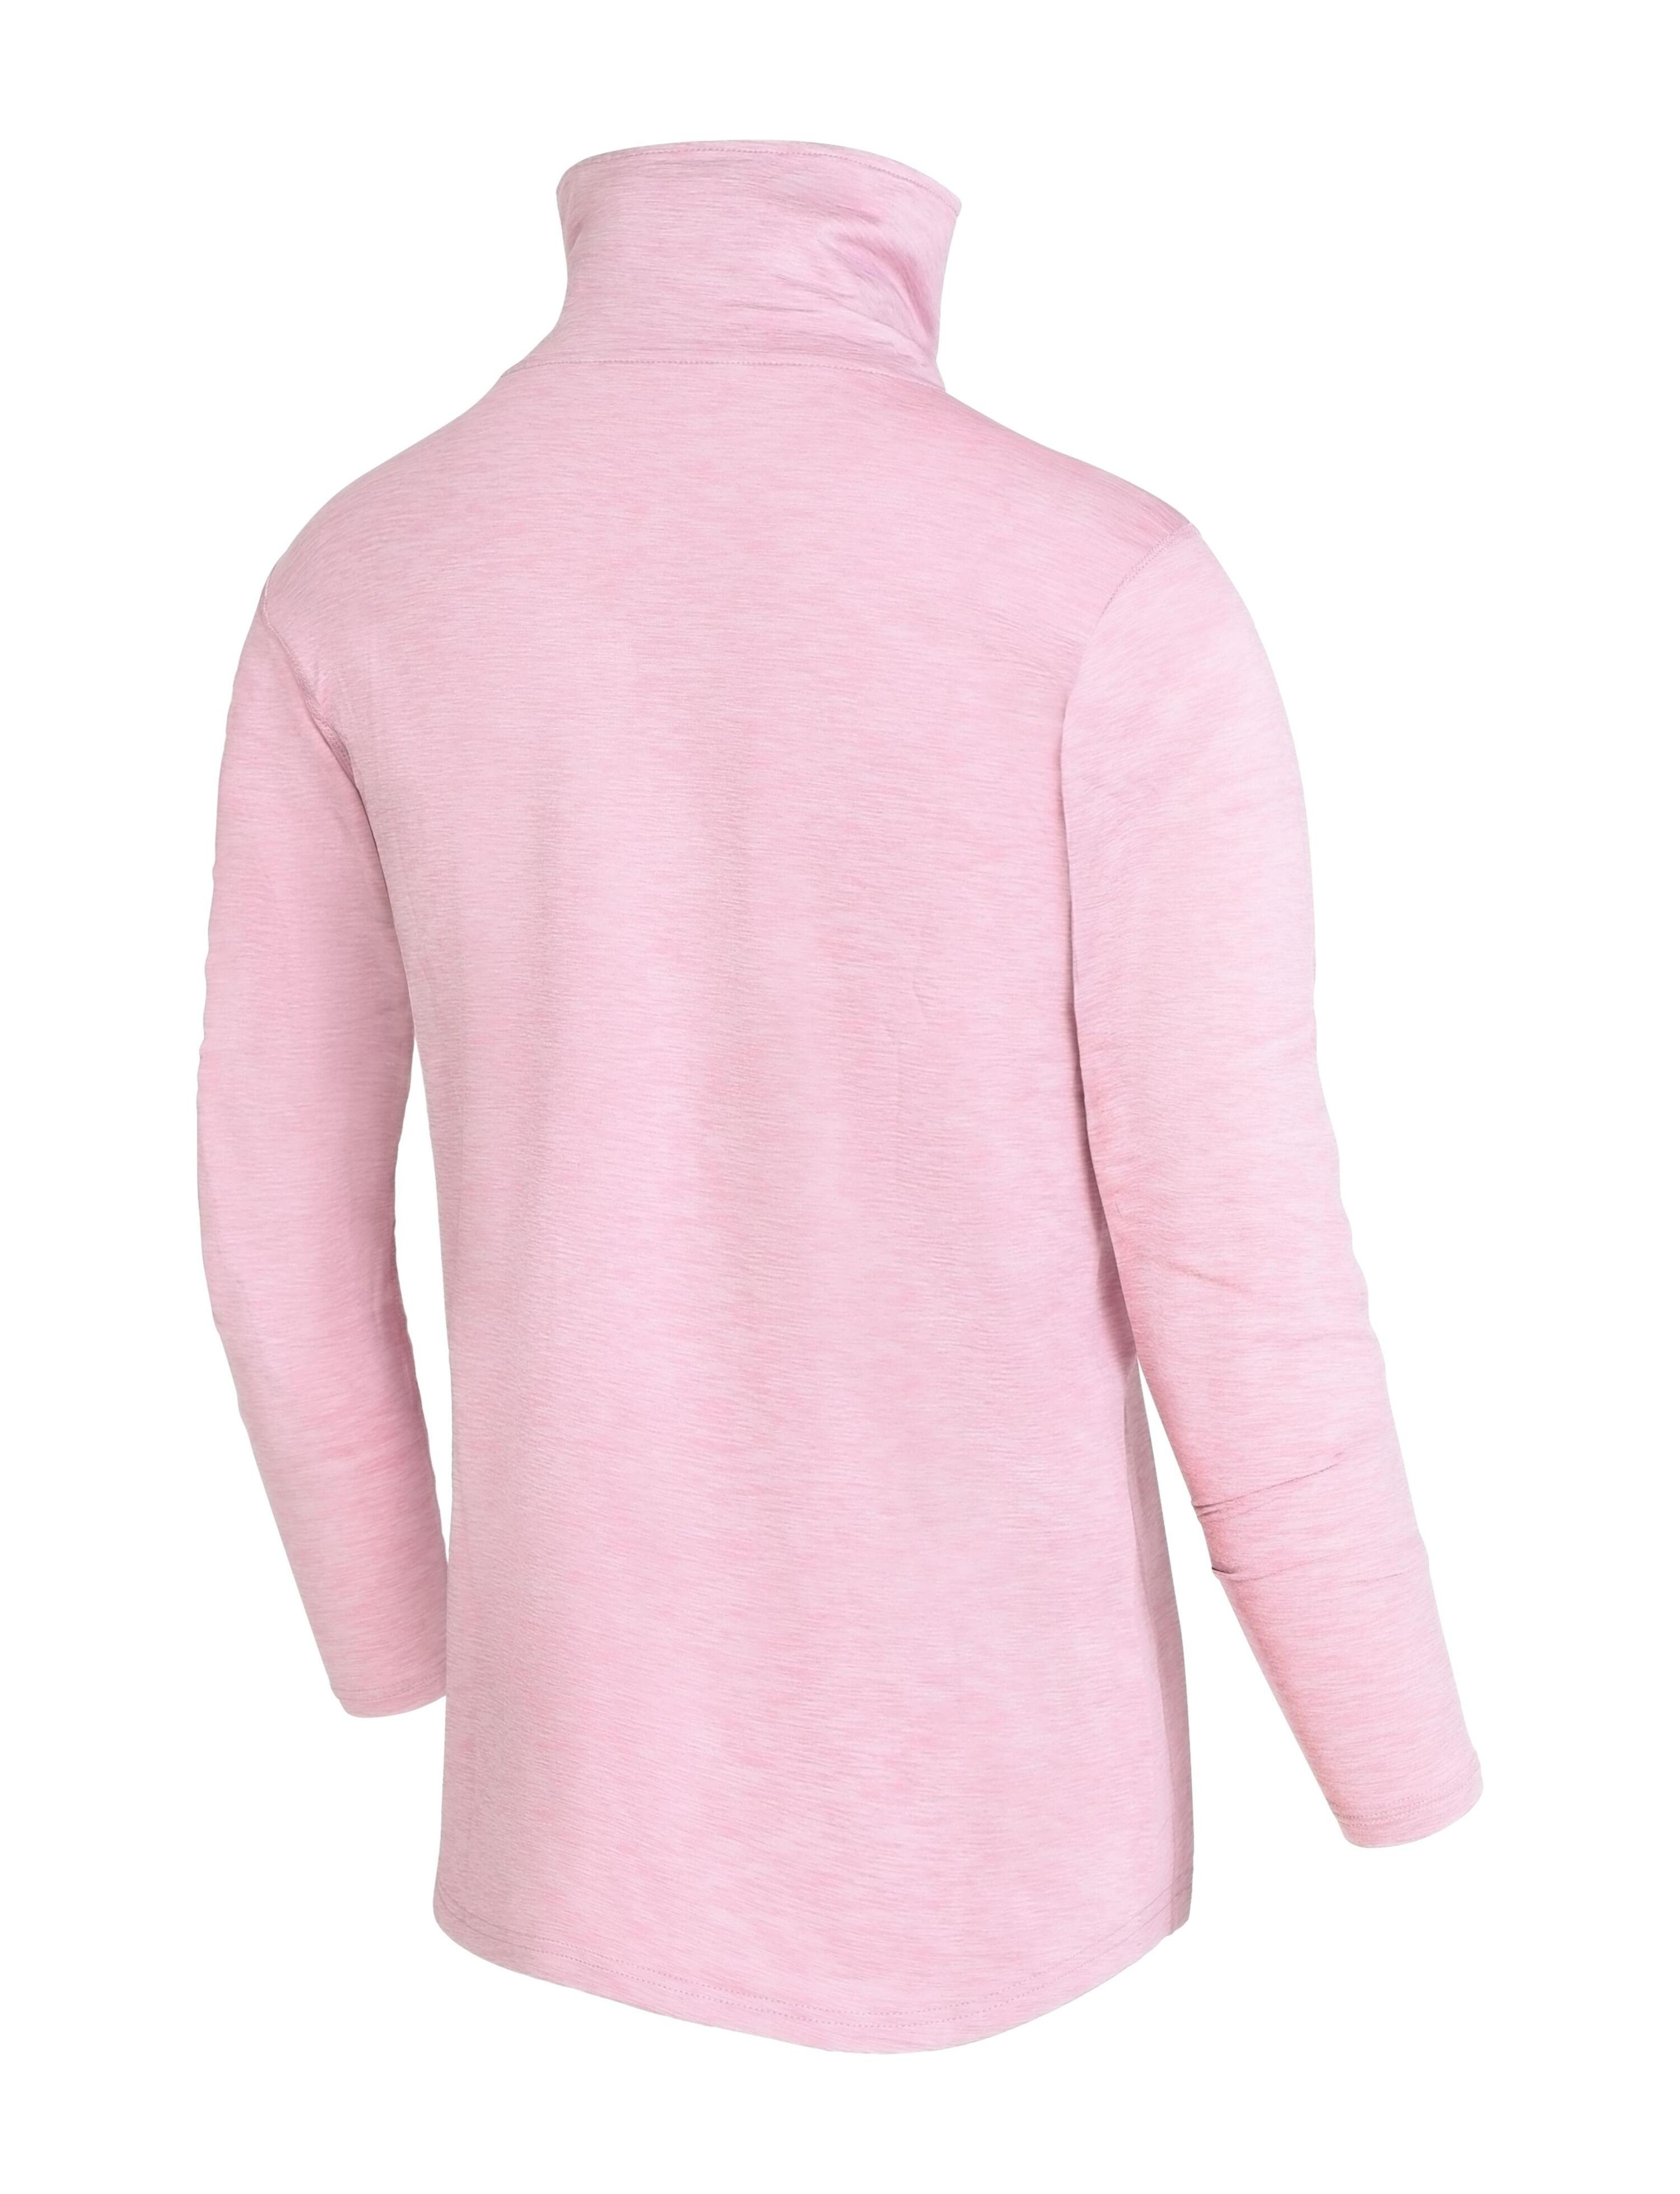 Girls' Thermal Funnel Neck Top - Sweet Lilac Marl 3/4